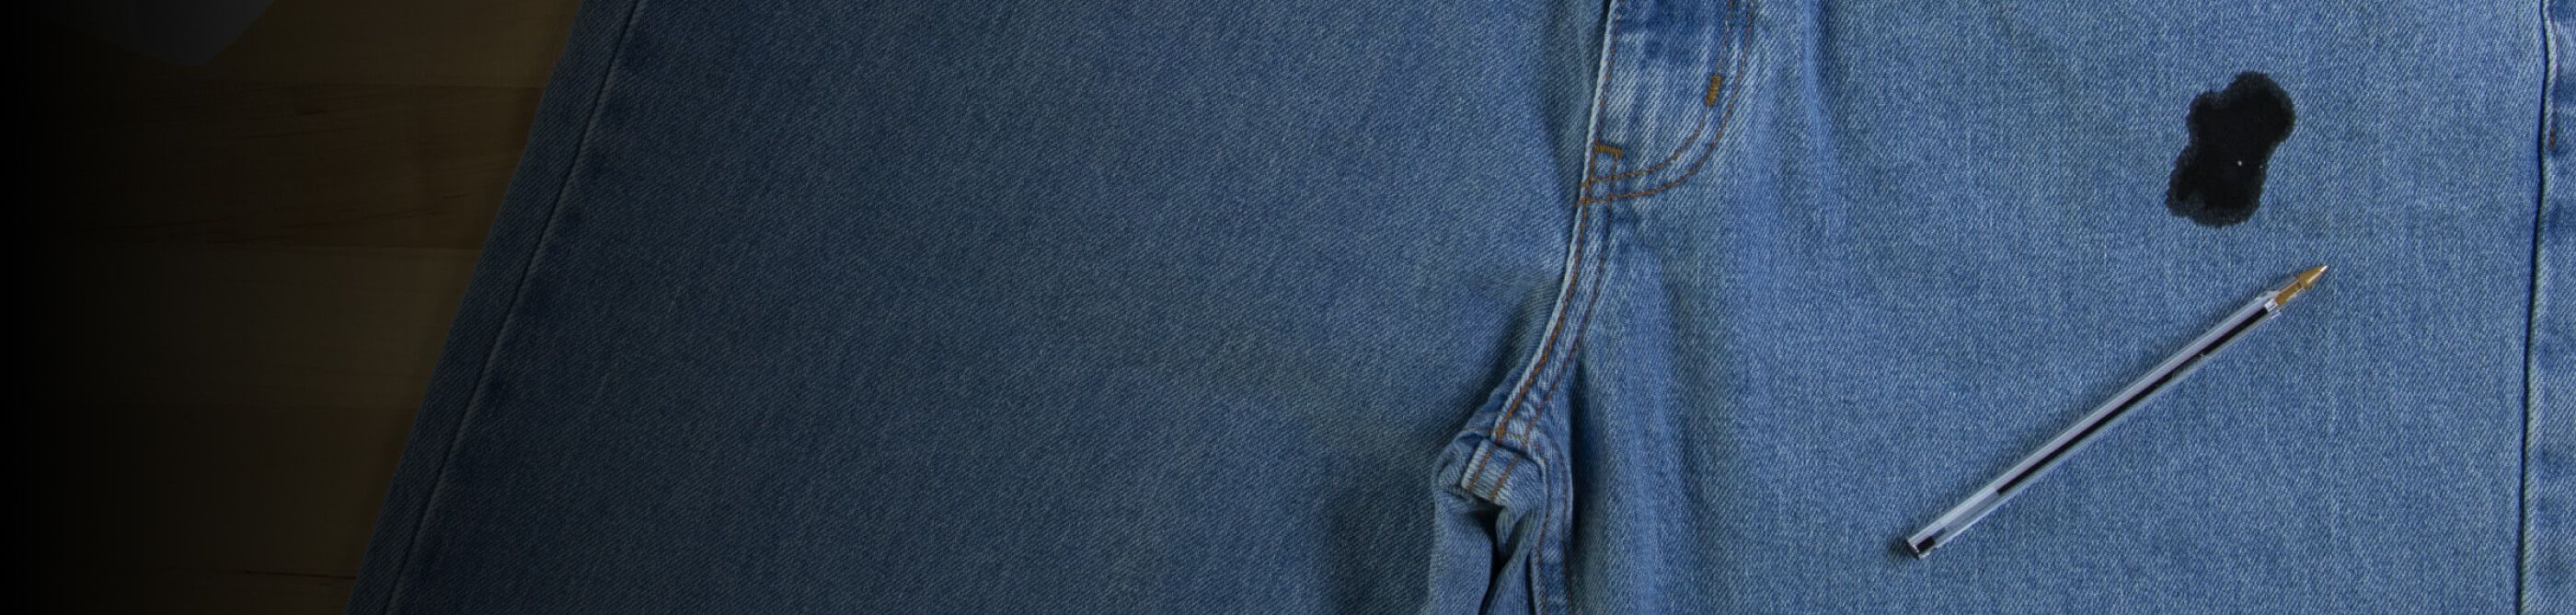 A pen on a pair of jeans stained with ink